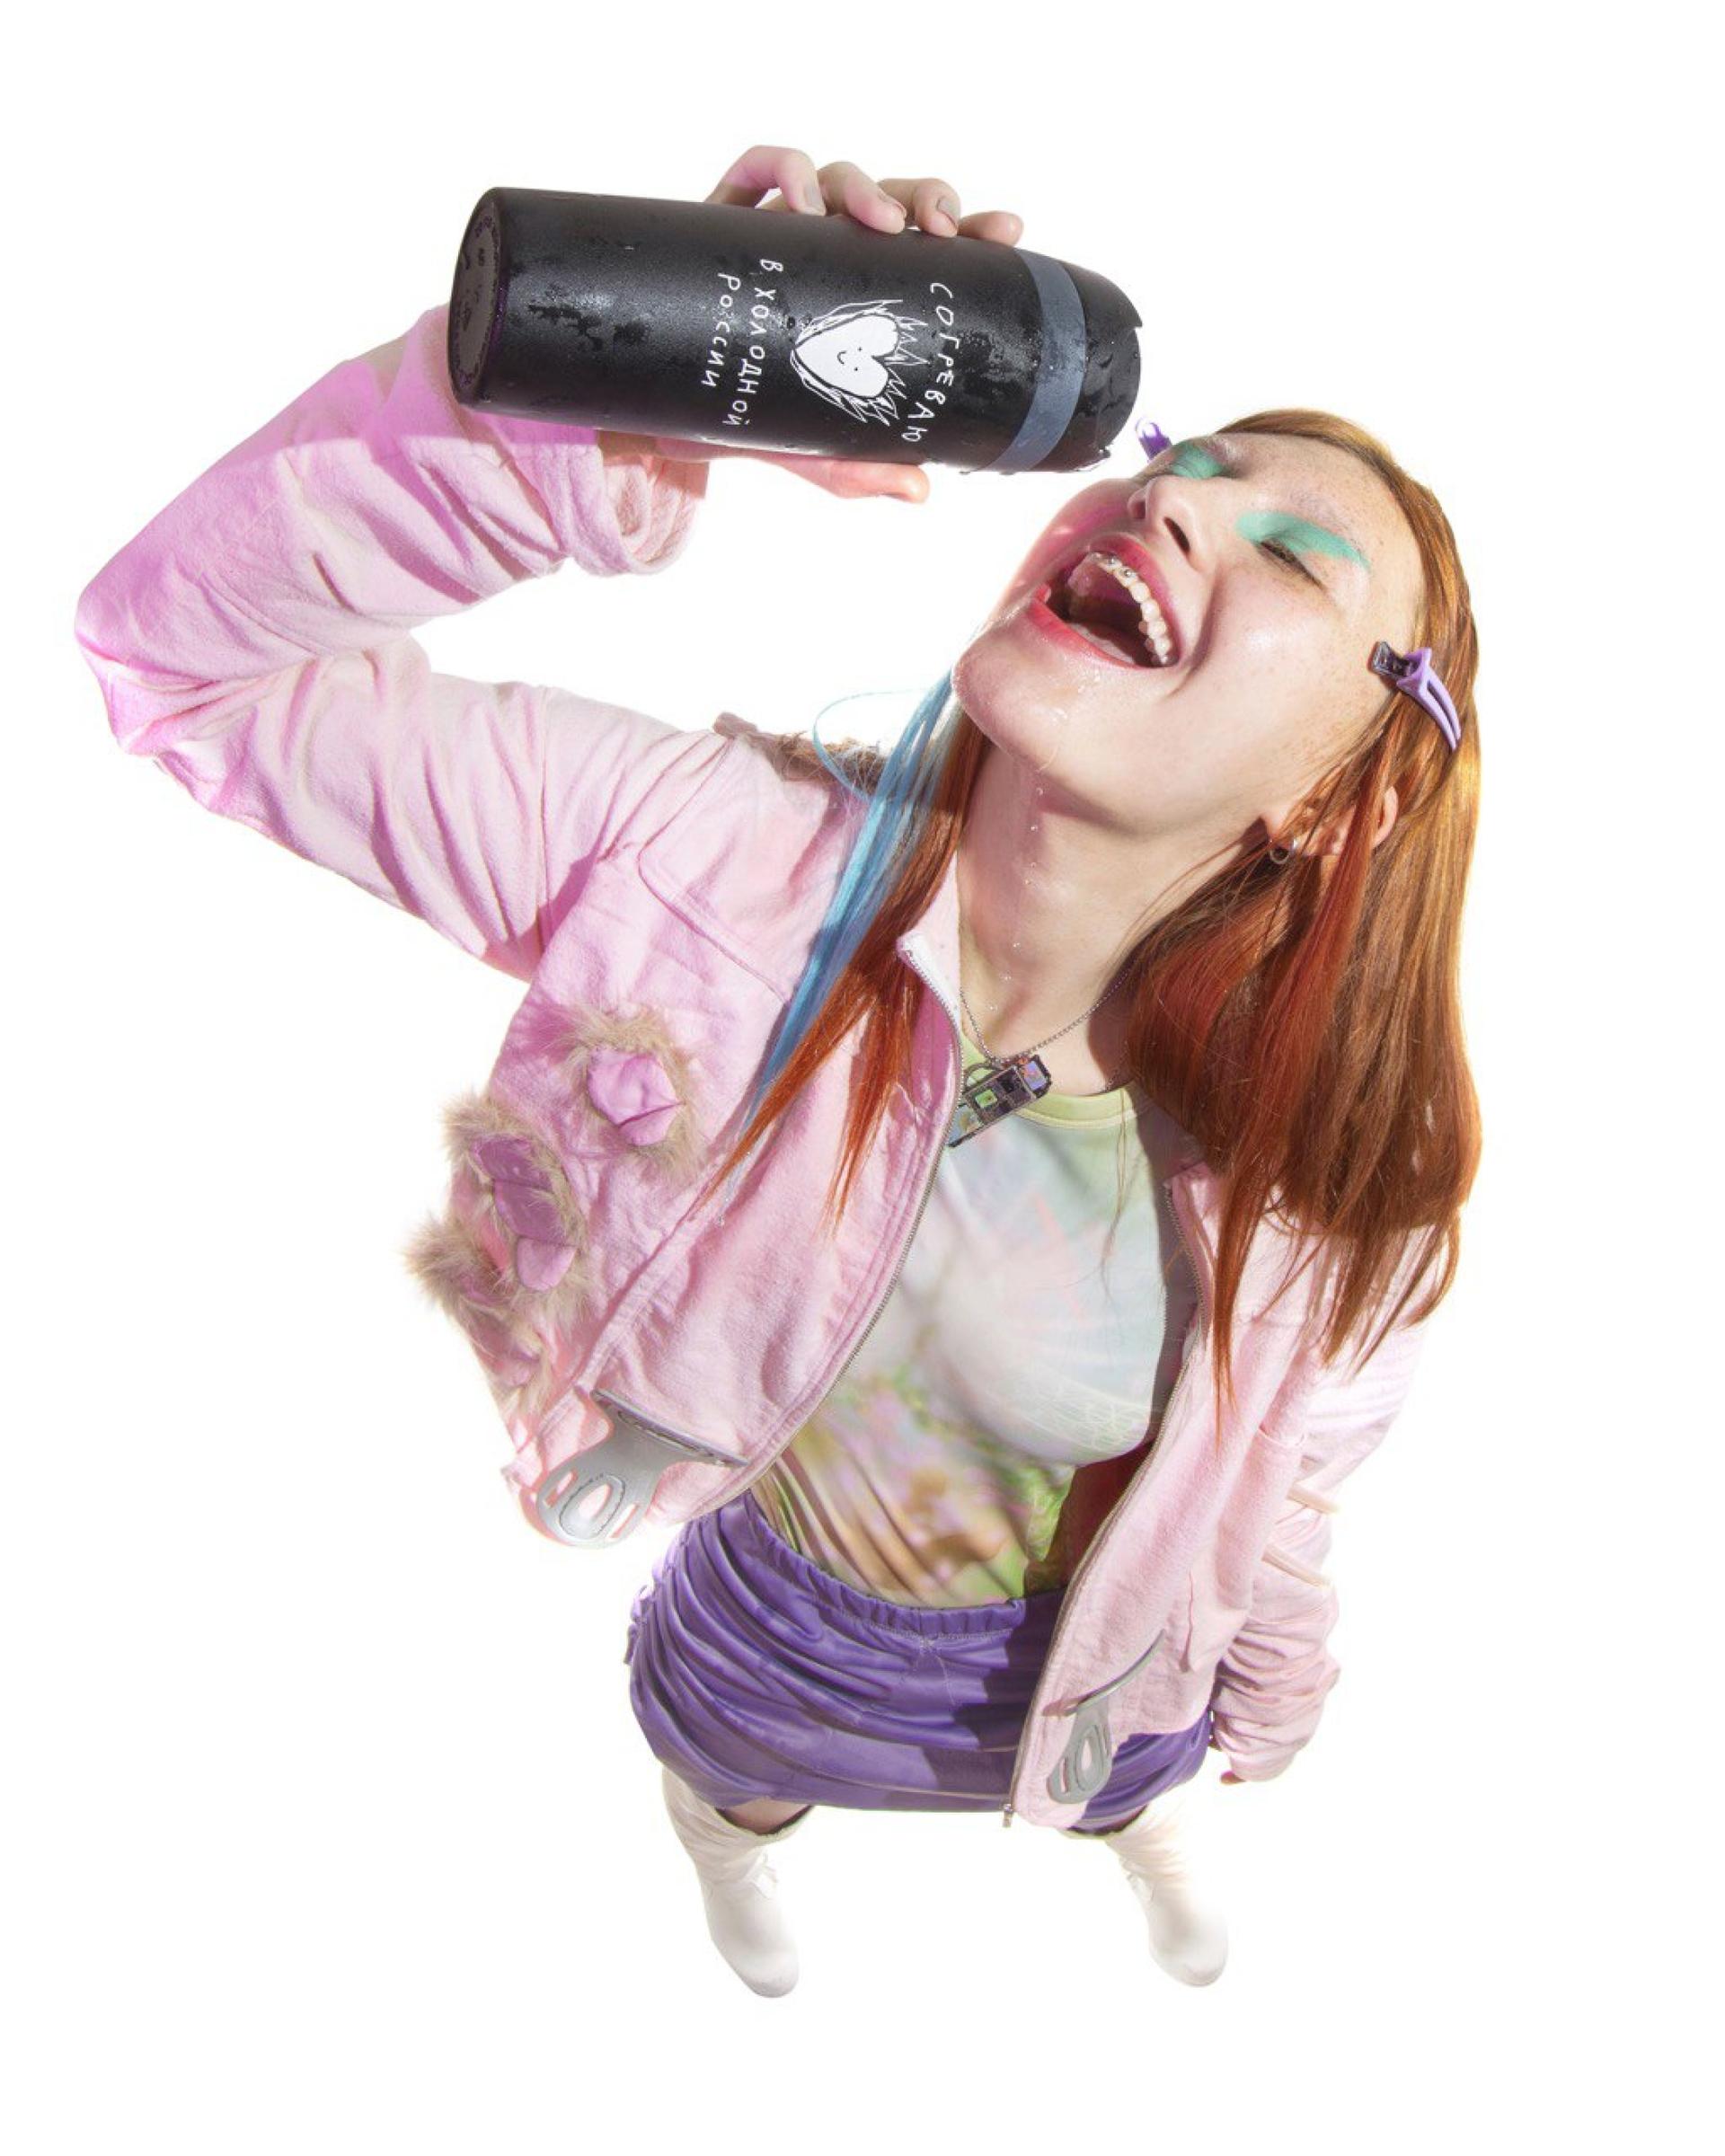 a woman in pink shown in a distorted perspective drinking out of a thermos